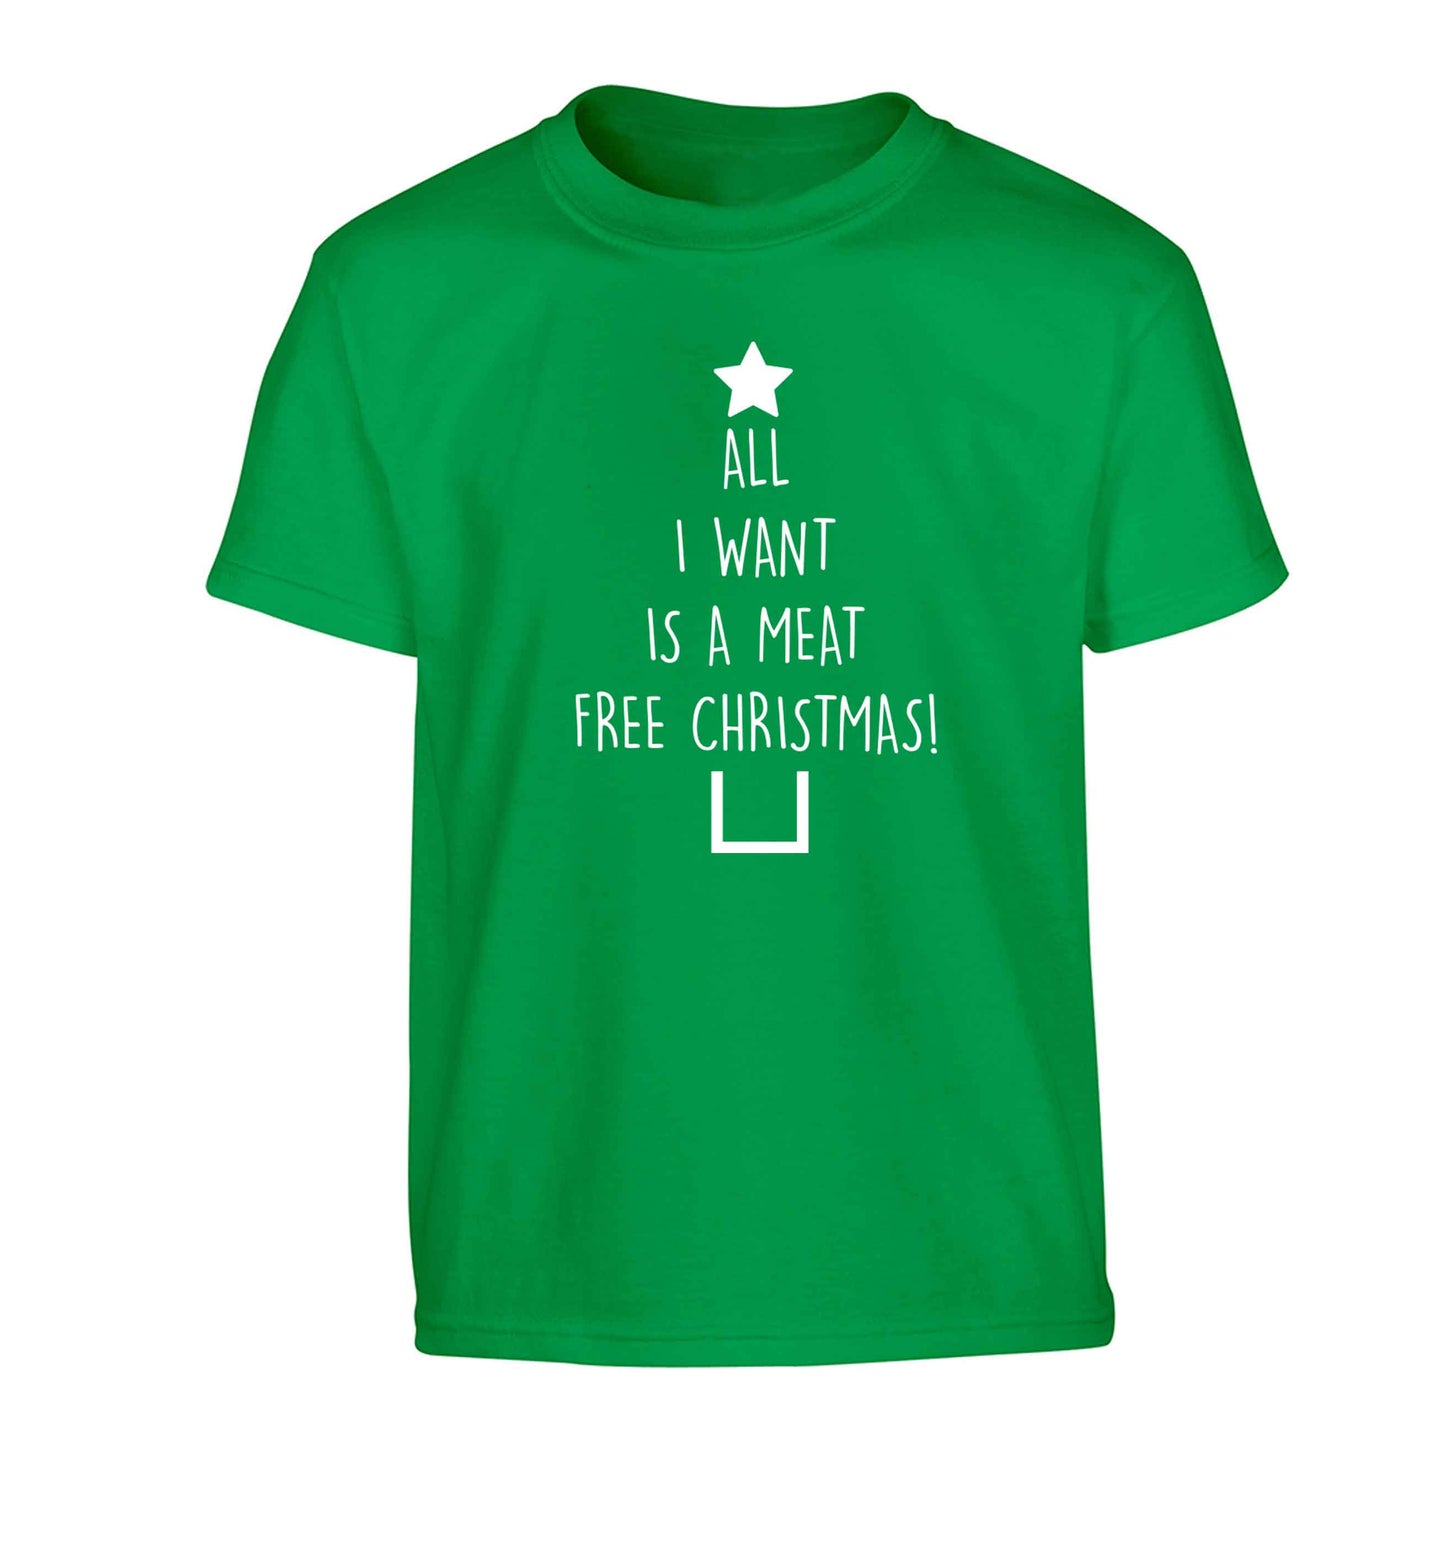 All I want is a meat free Christmas Children's green Tshirt 12-13 Years